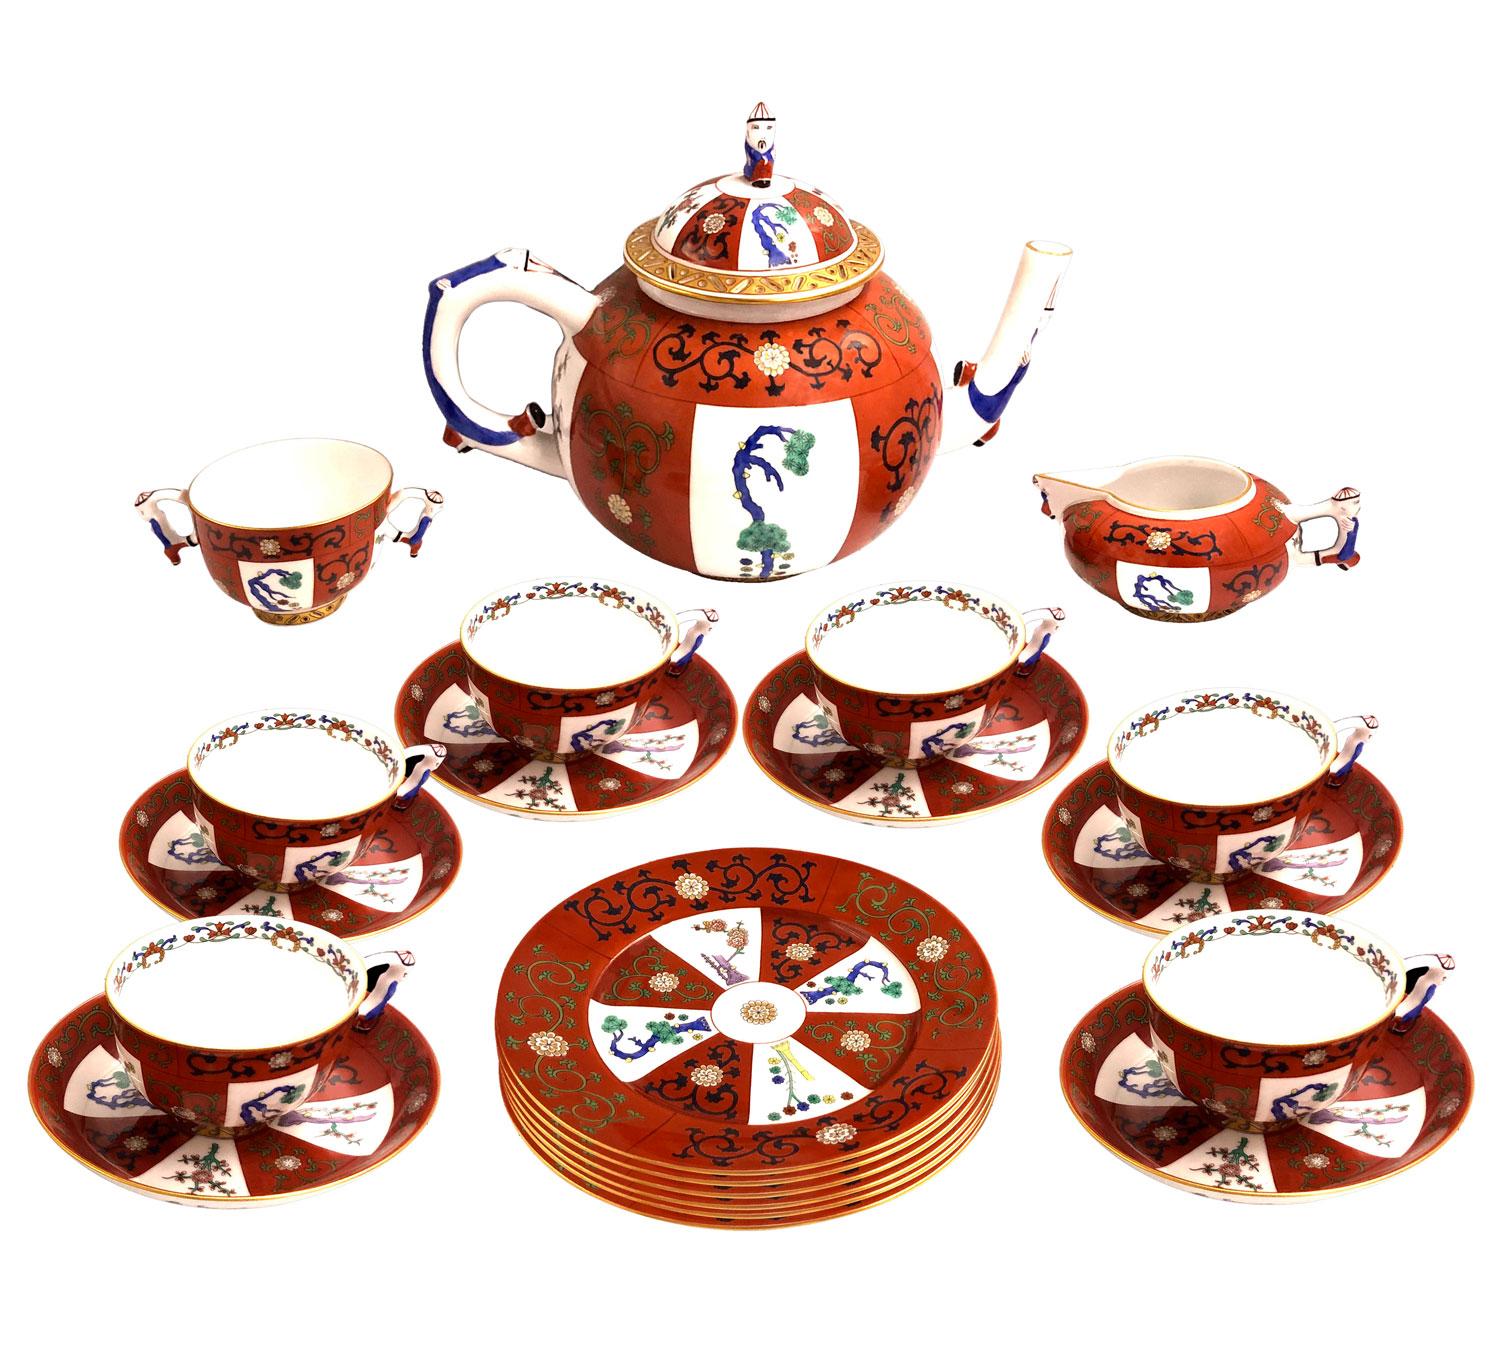 Godollo tea set in Herend Porcelaine for 6 persons. Japanese Kakiemon inspired hand-painted porcelain decorated with alternate white and red bands adorned with floral motifs and stylized trees in green, blue and red. On handles, decoration of Asian